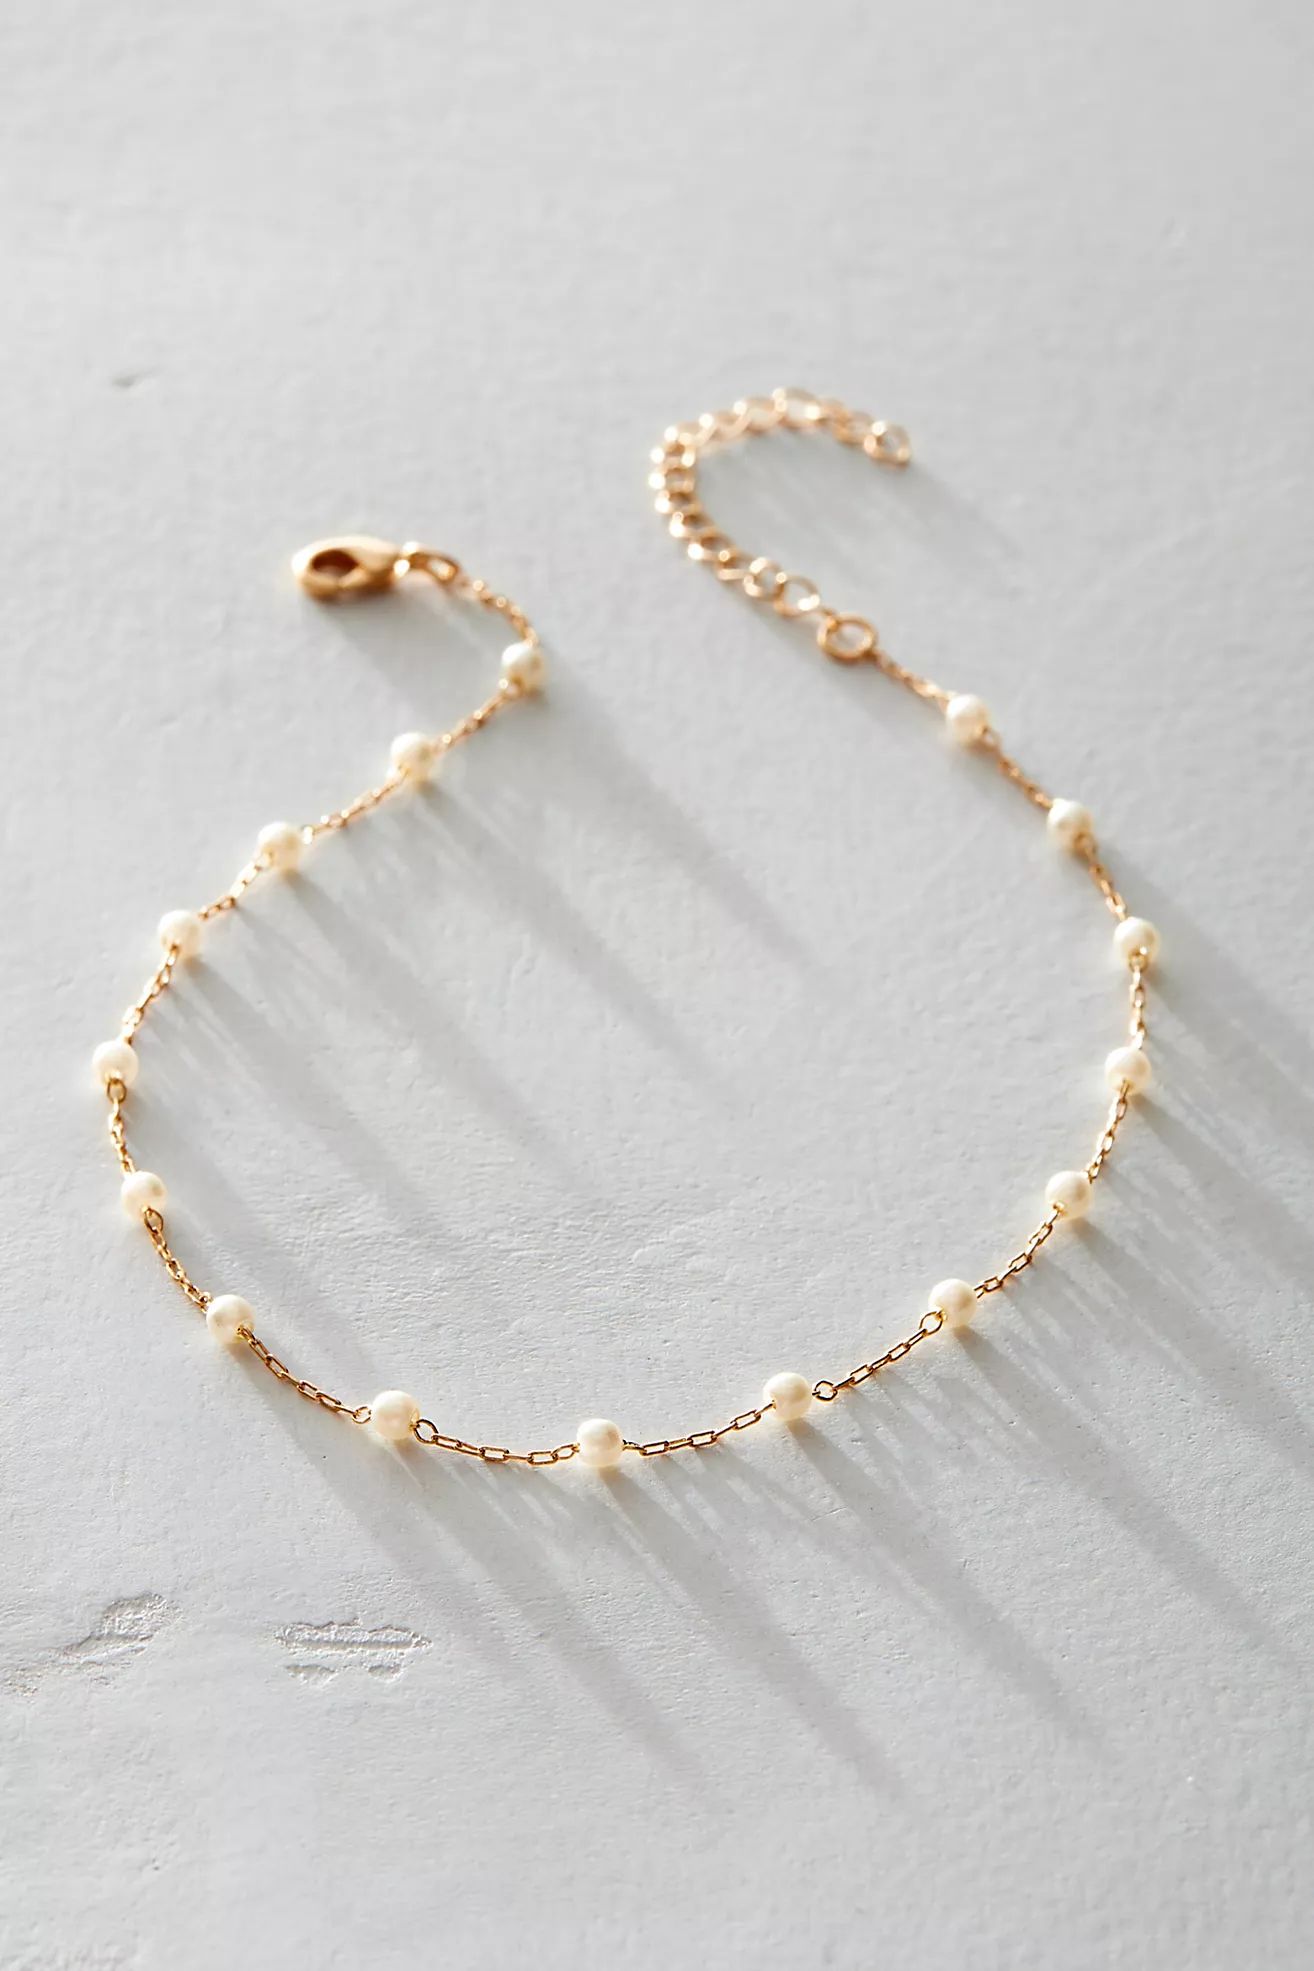 Free People X Joy Dravecky Exclusive Dainty Anklet | Free People (Global - UK&FR Excluded)